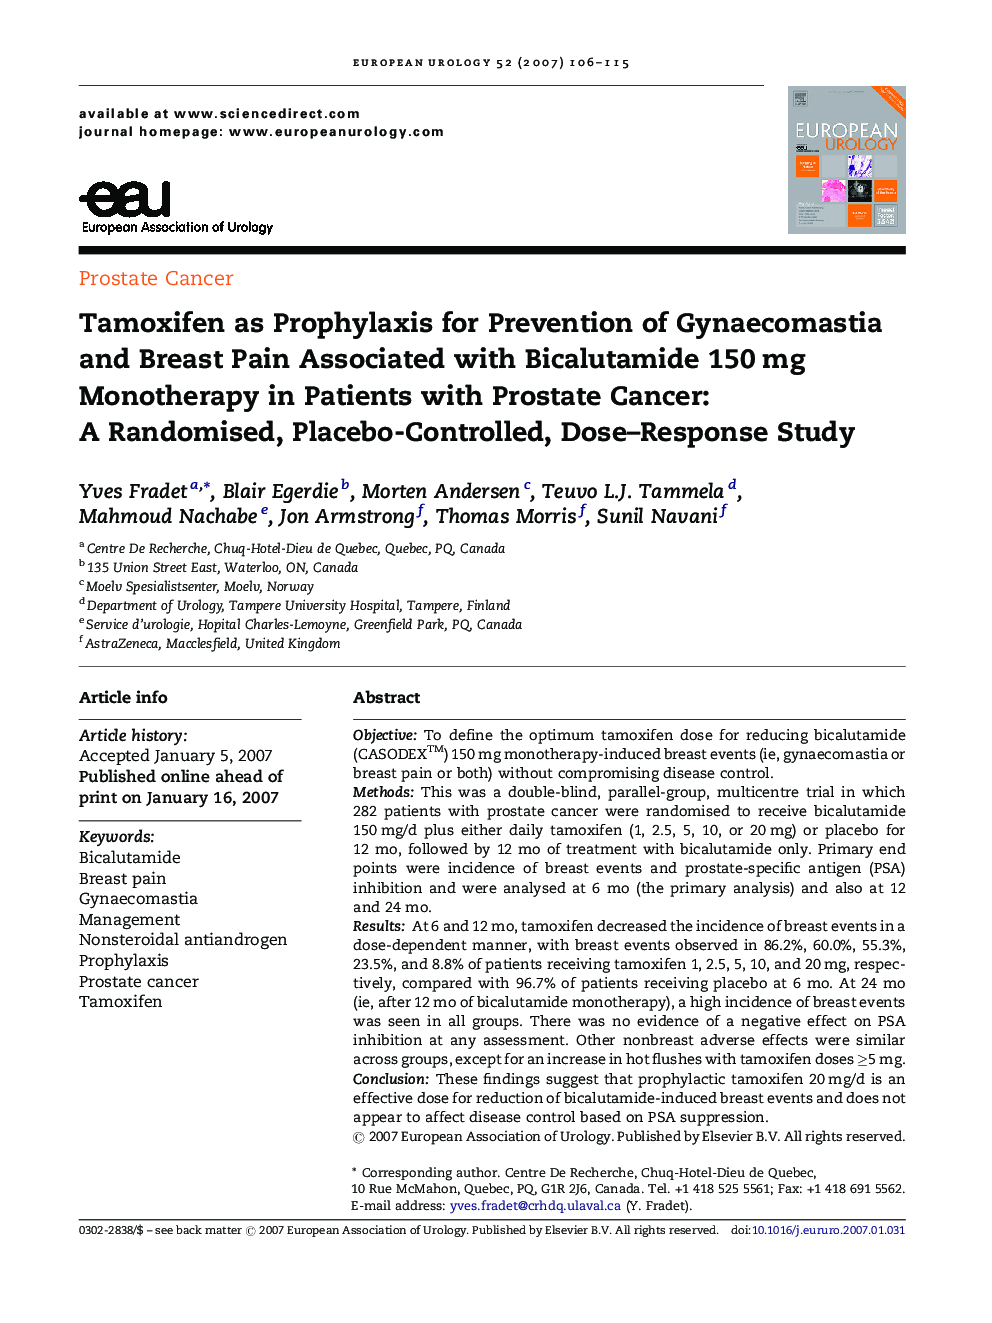 Tamoxifen as Prophylaxis for Prevention of Gynaecomastia and Breast Pain Associated with Bicalutamide 150 mg Monotherapy in Patients with Prostate Cancer: A Randomised, Placebo-Controlled, Dose–Response Study